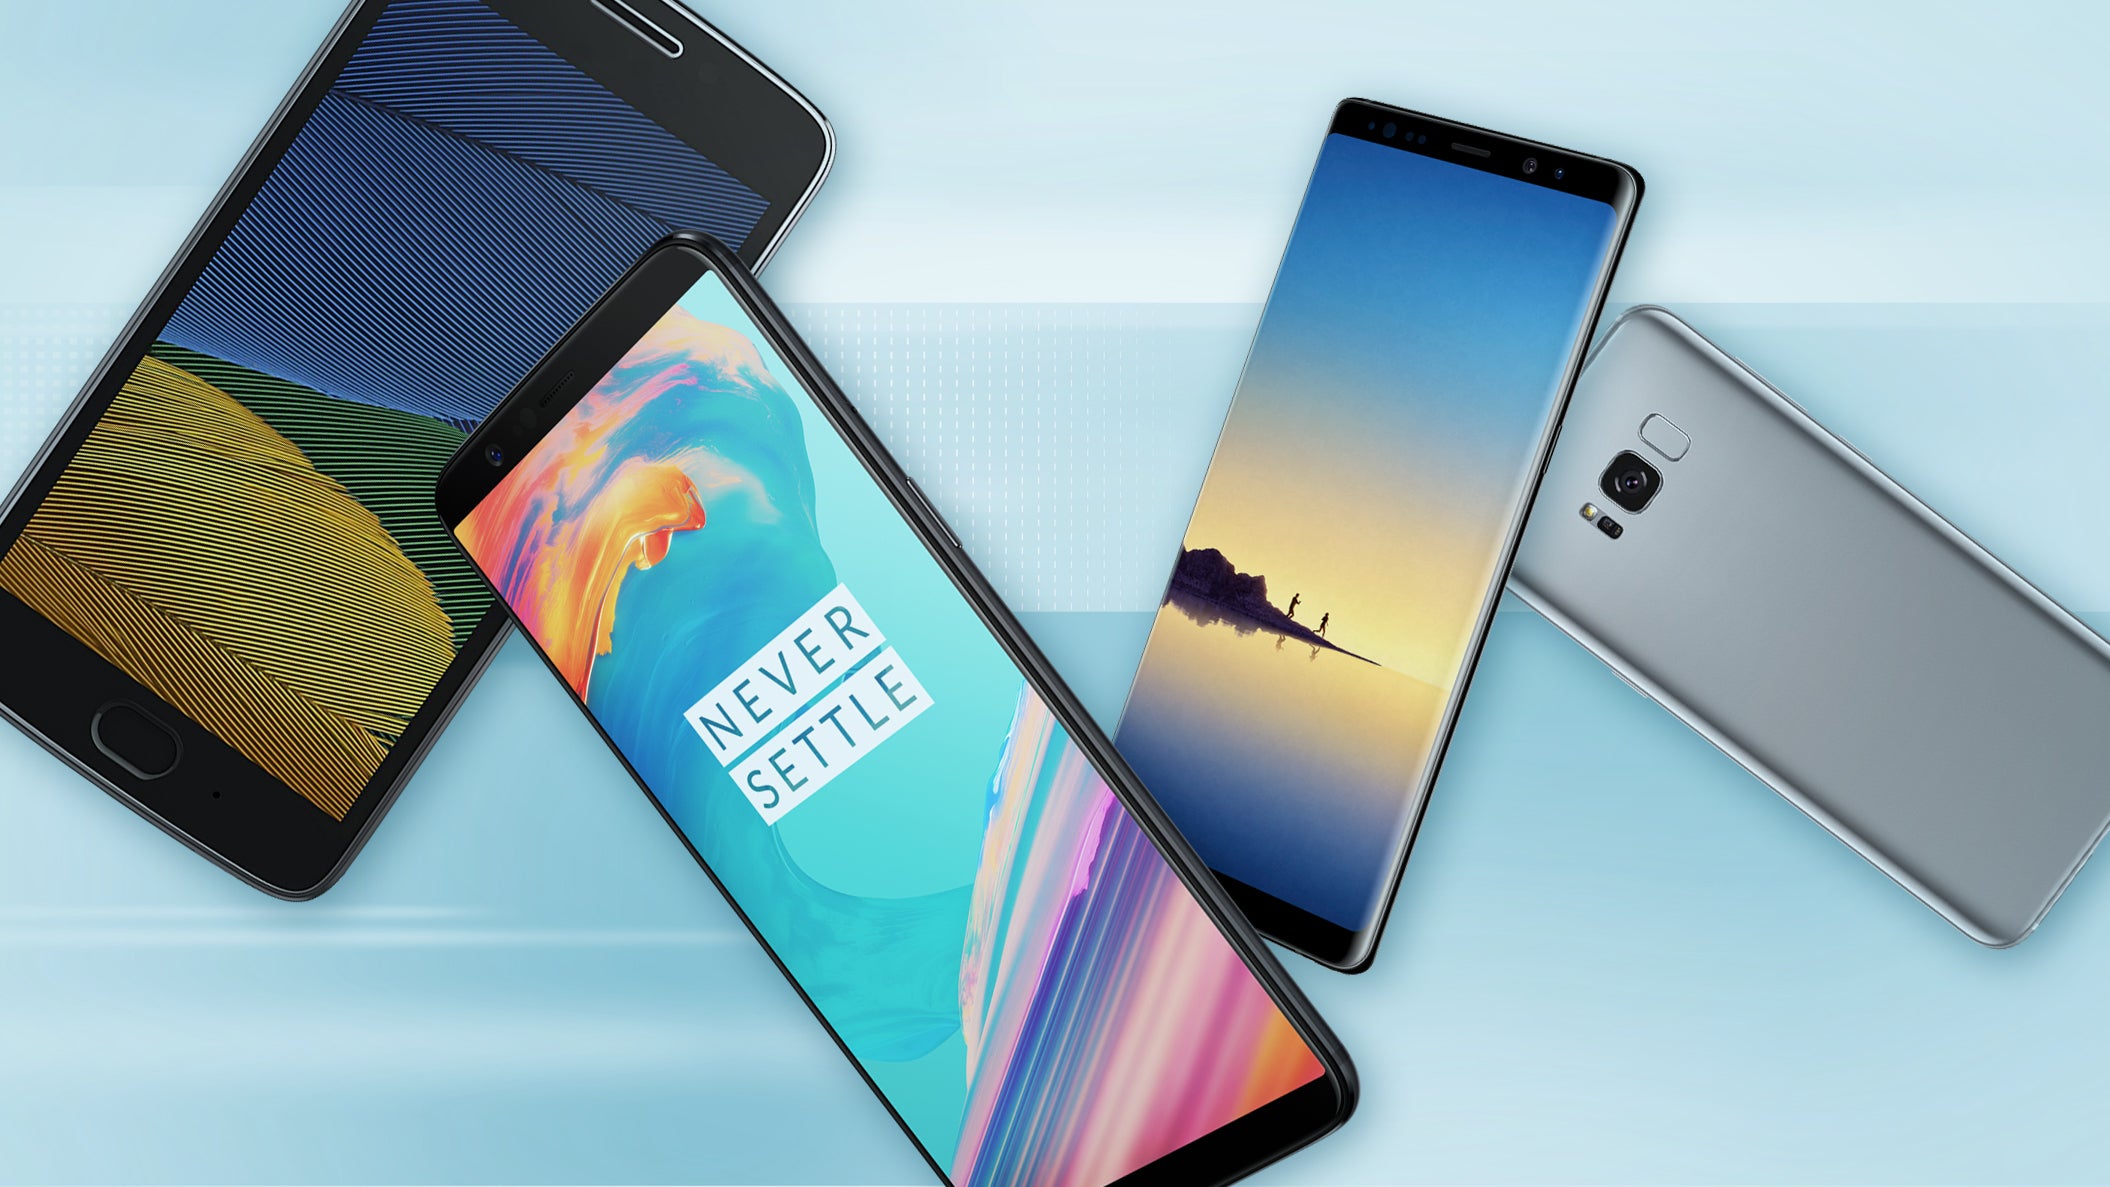 Best Android phones 2018: Reviews and buying advice | ITworld